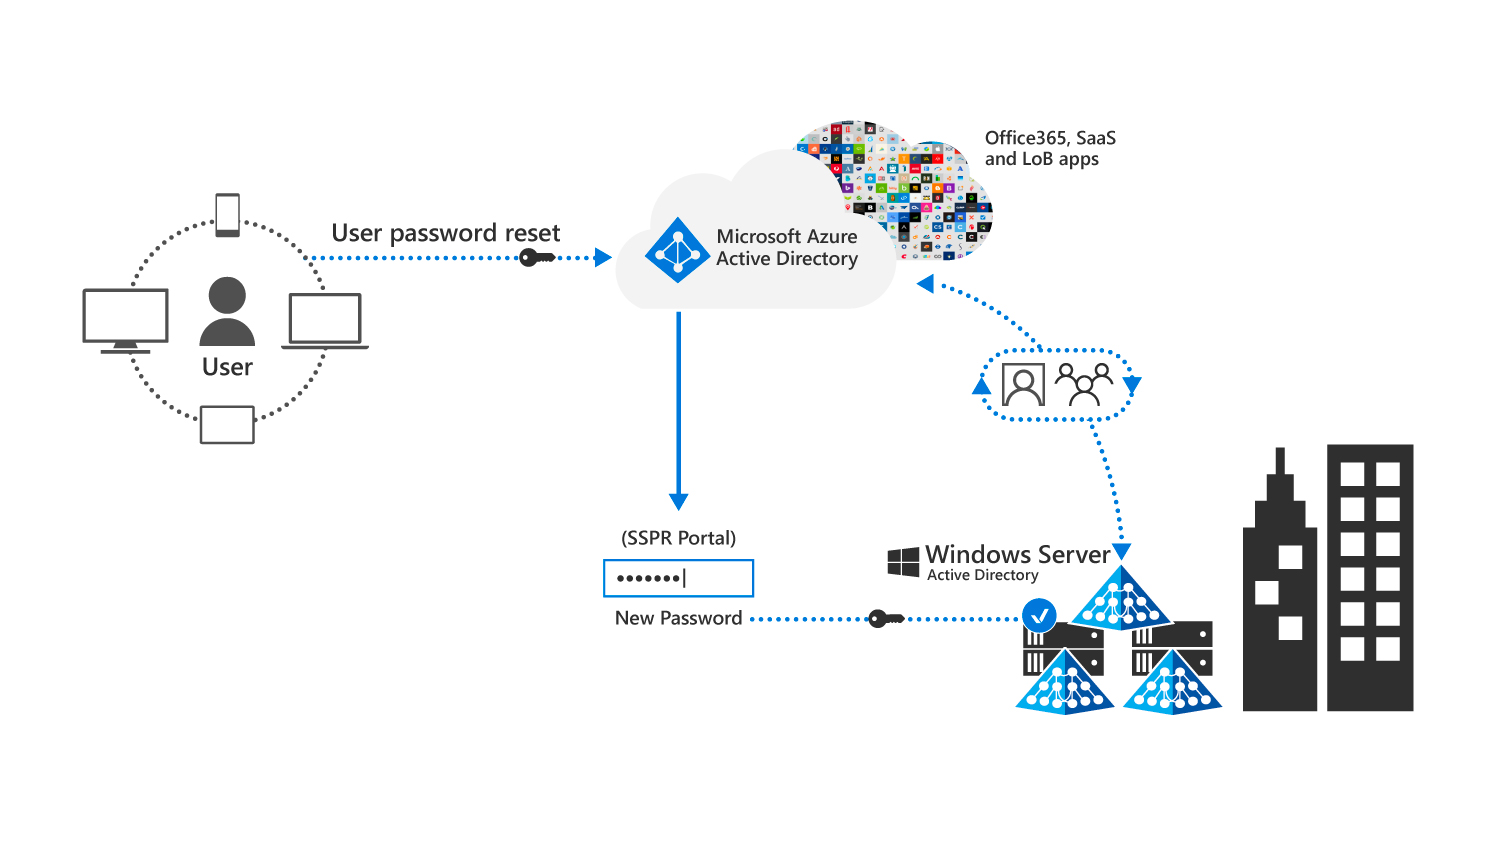 graphic depicts how a user can do a self-service password reset, at which point the new password is synchronized over Microsoft Entra Connect, although it doesn't follow the same scheduler